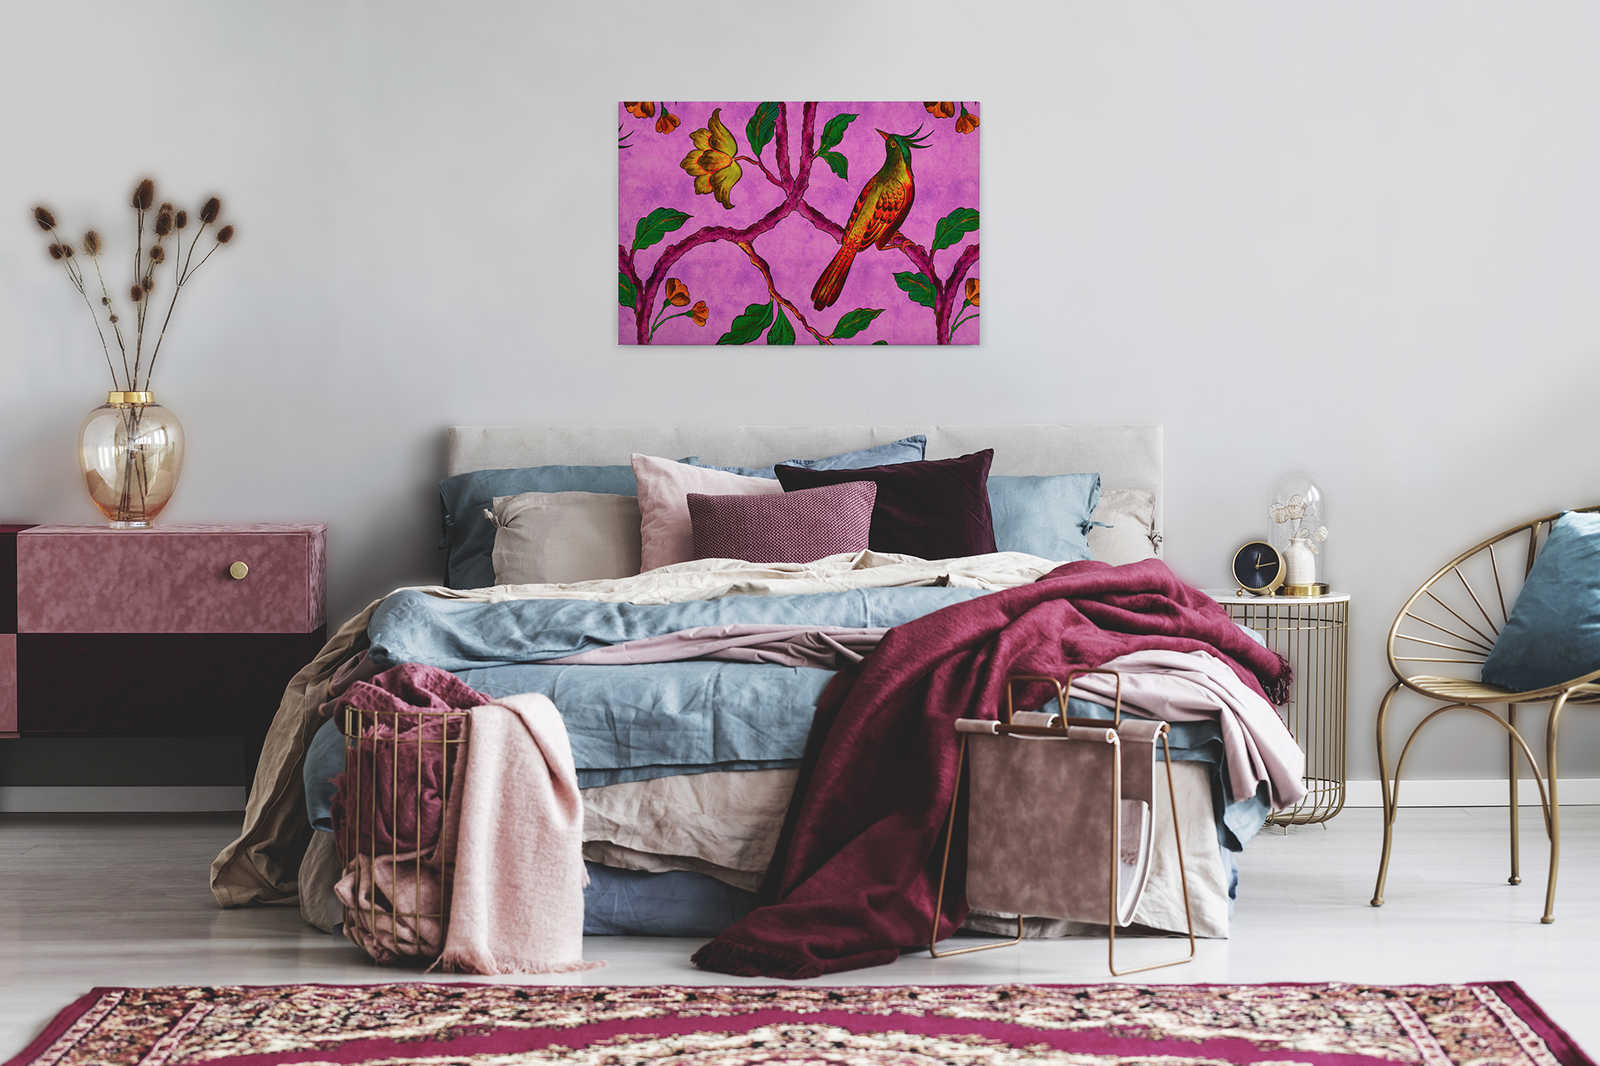             Bird Of Paradis 2 - Canvas painting Bird of Paradise in natural linen structure - 0,90 m x 0,60 m
        